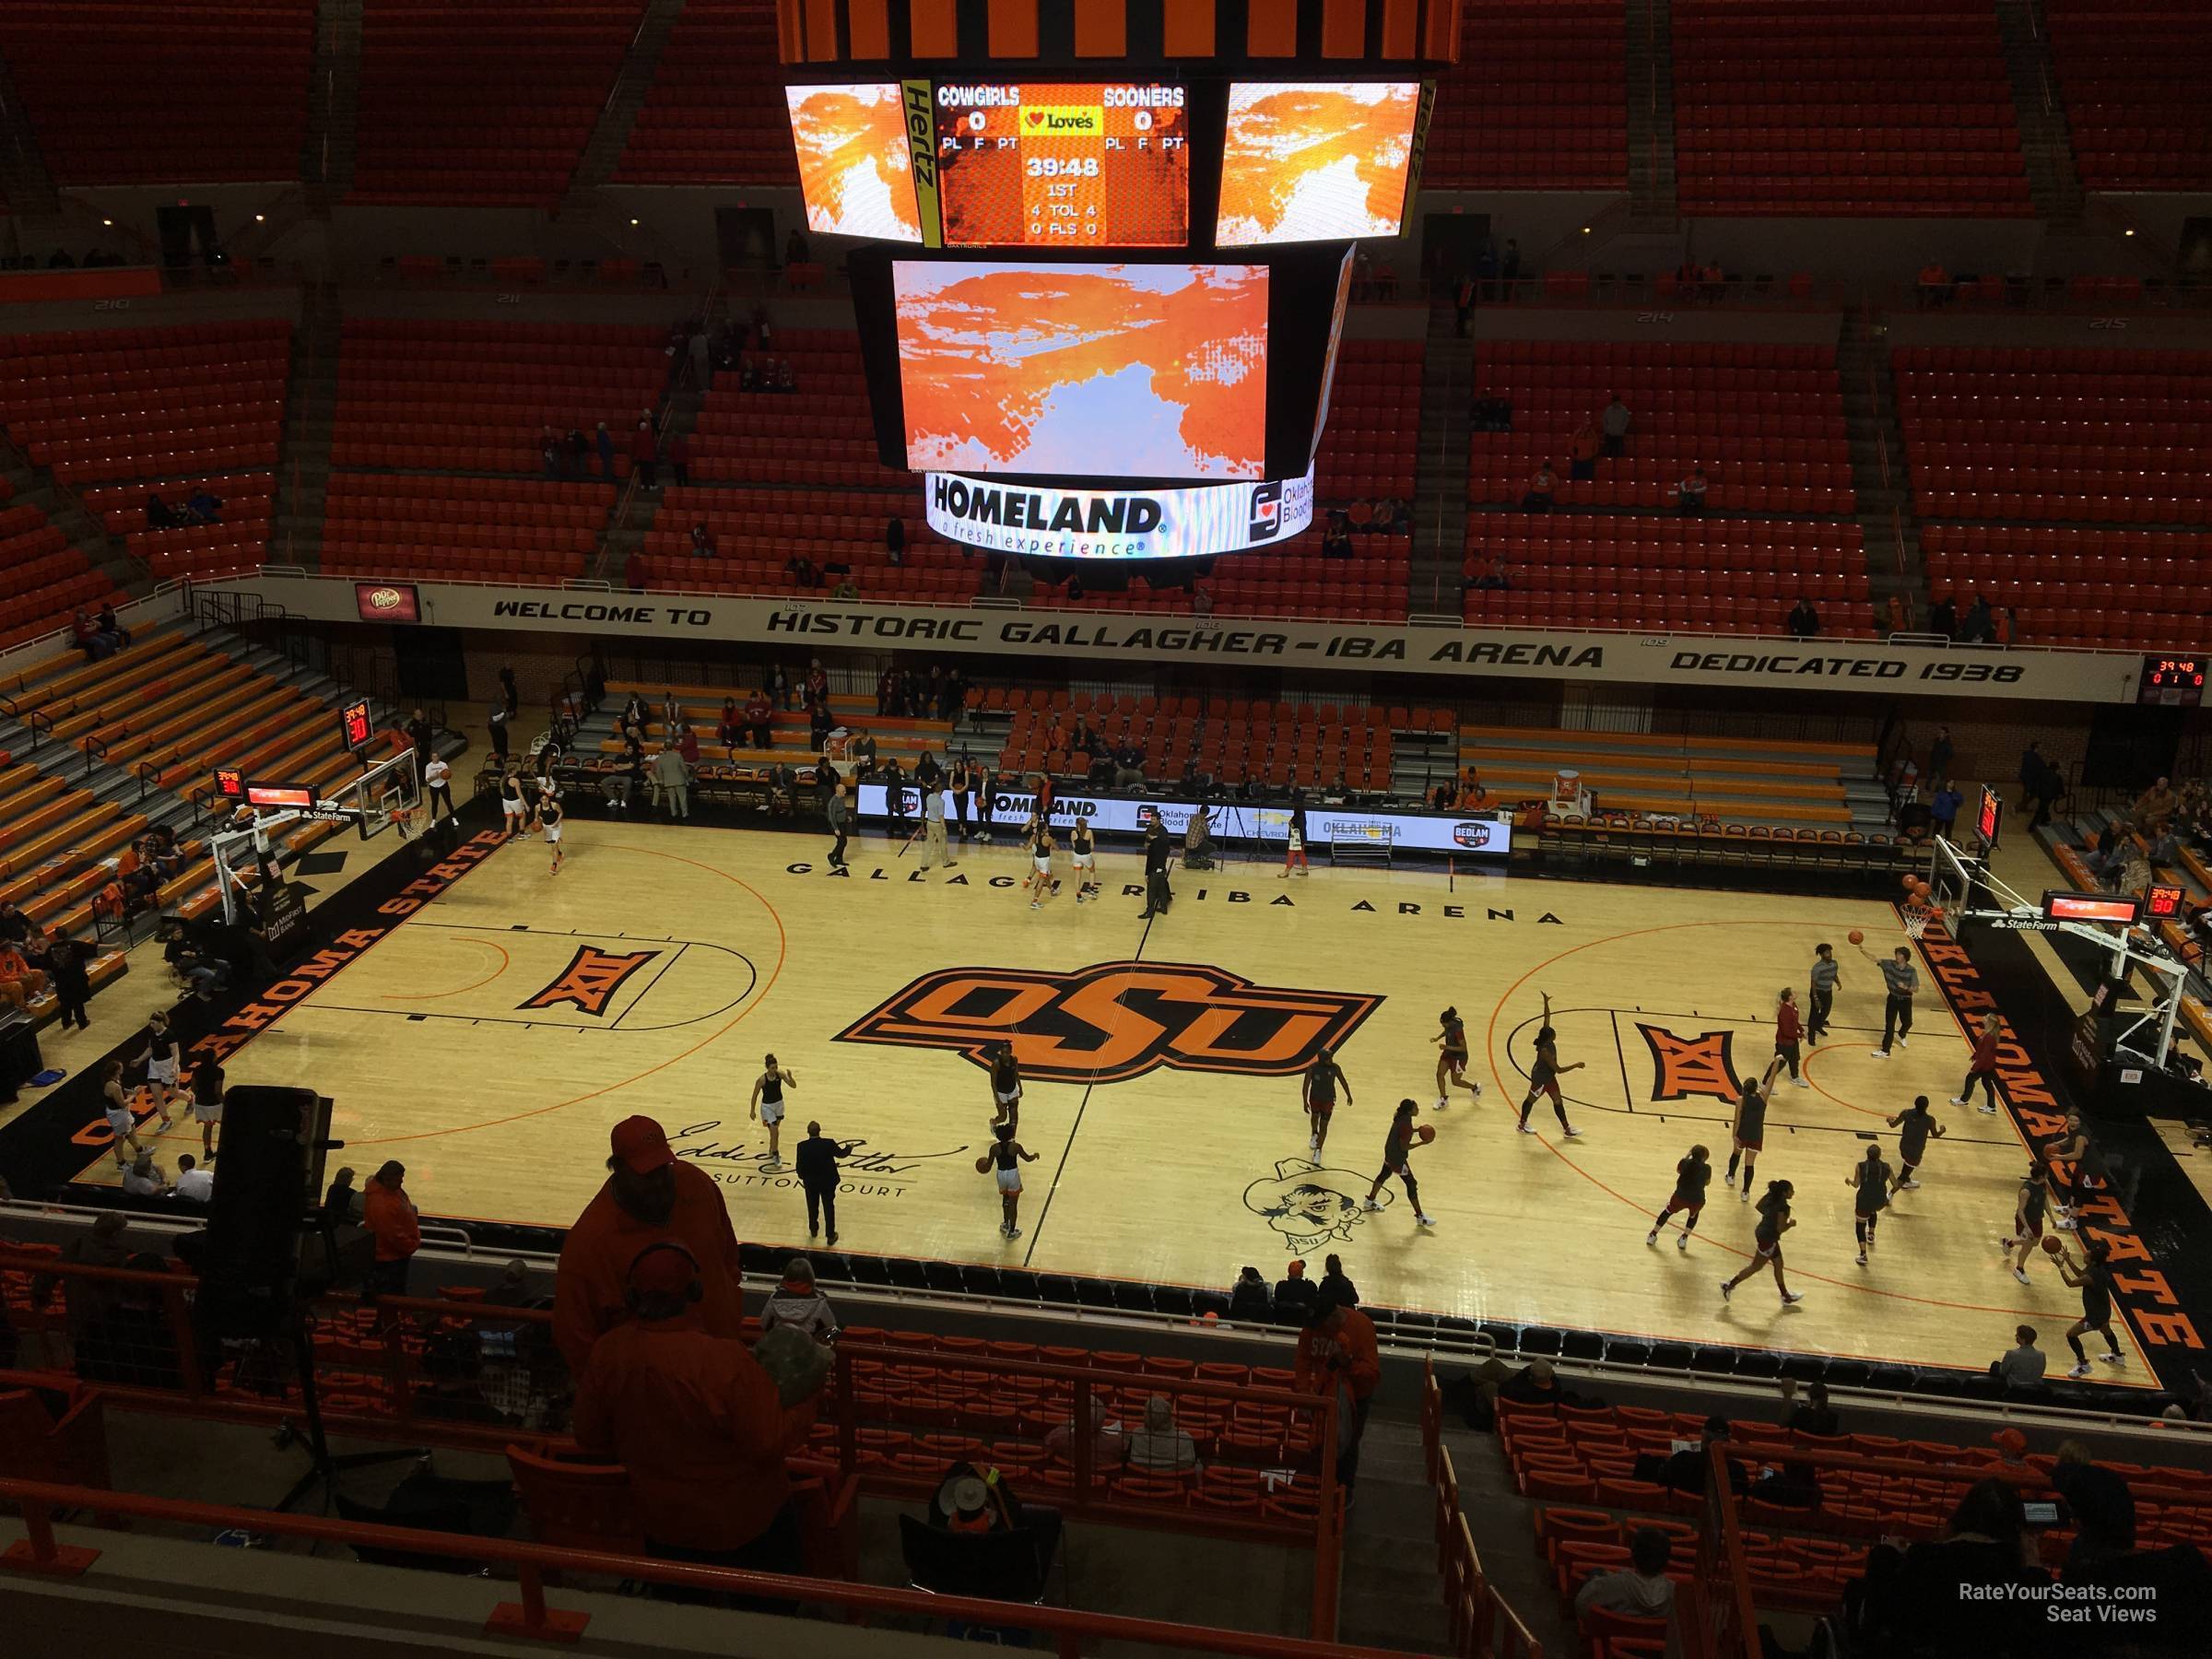 section 303, row 5 seat view  - gallagher-iba arena